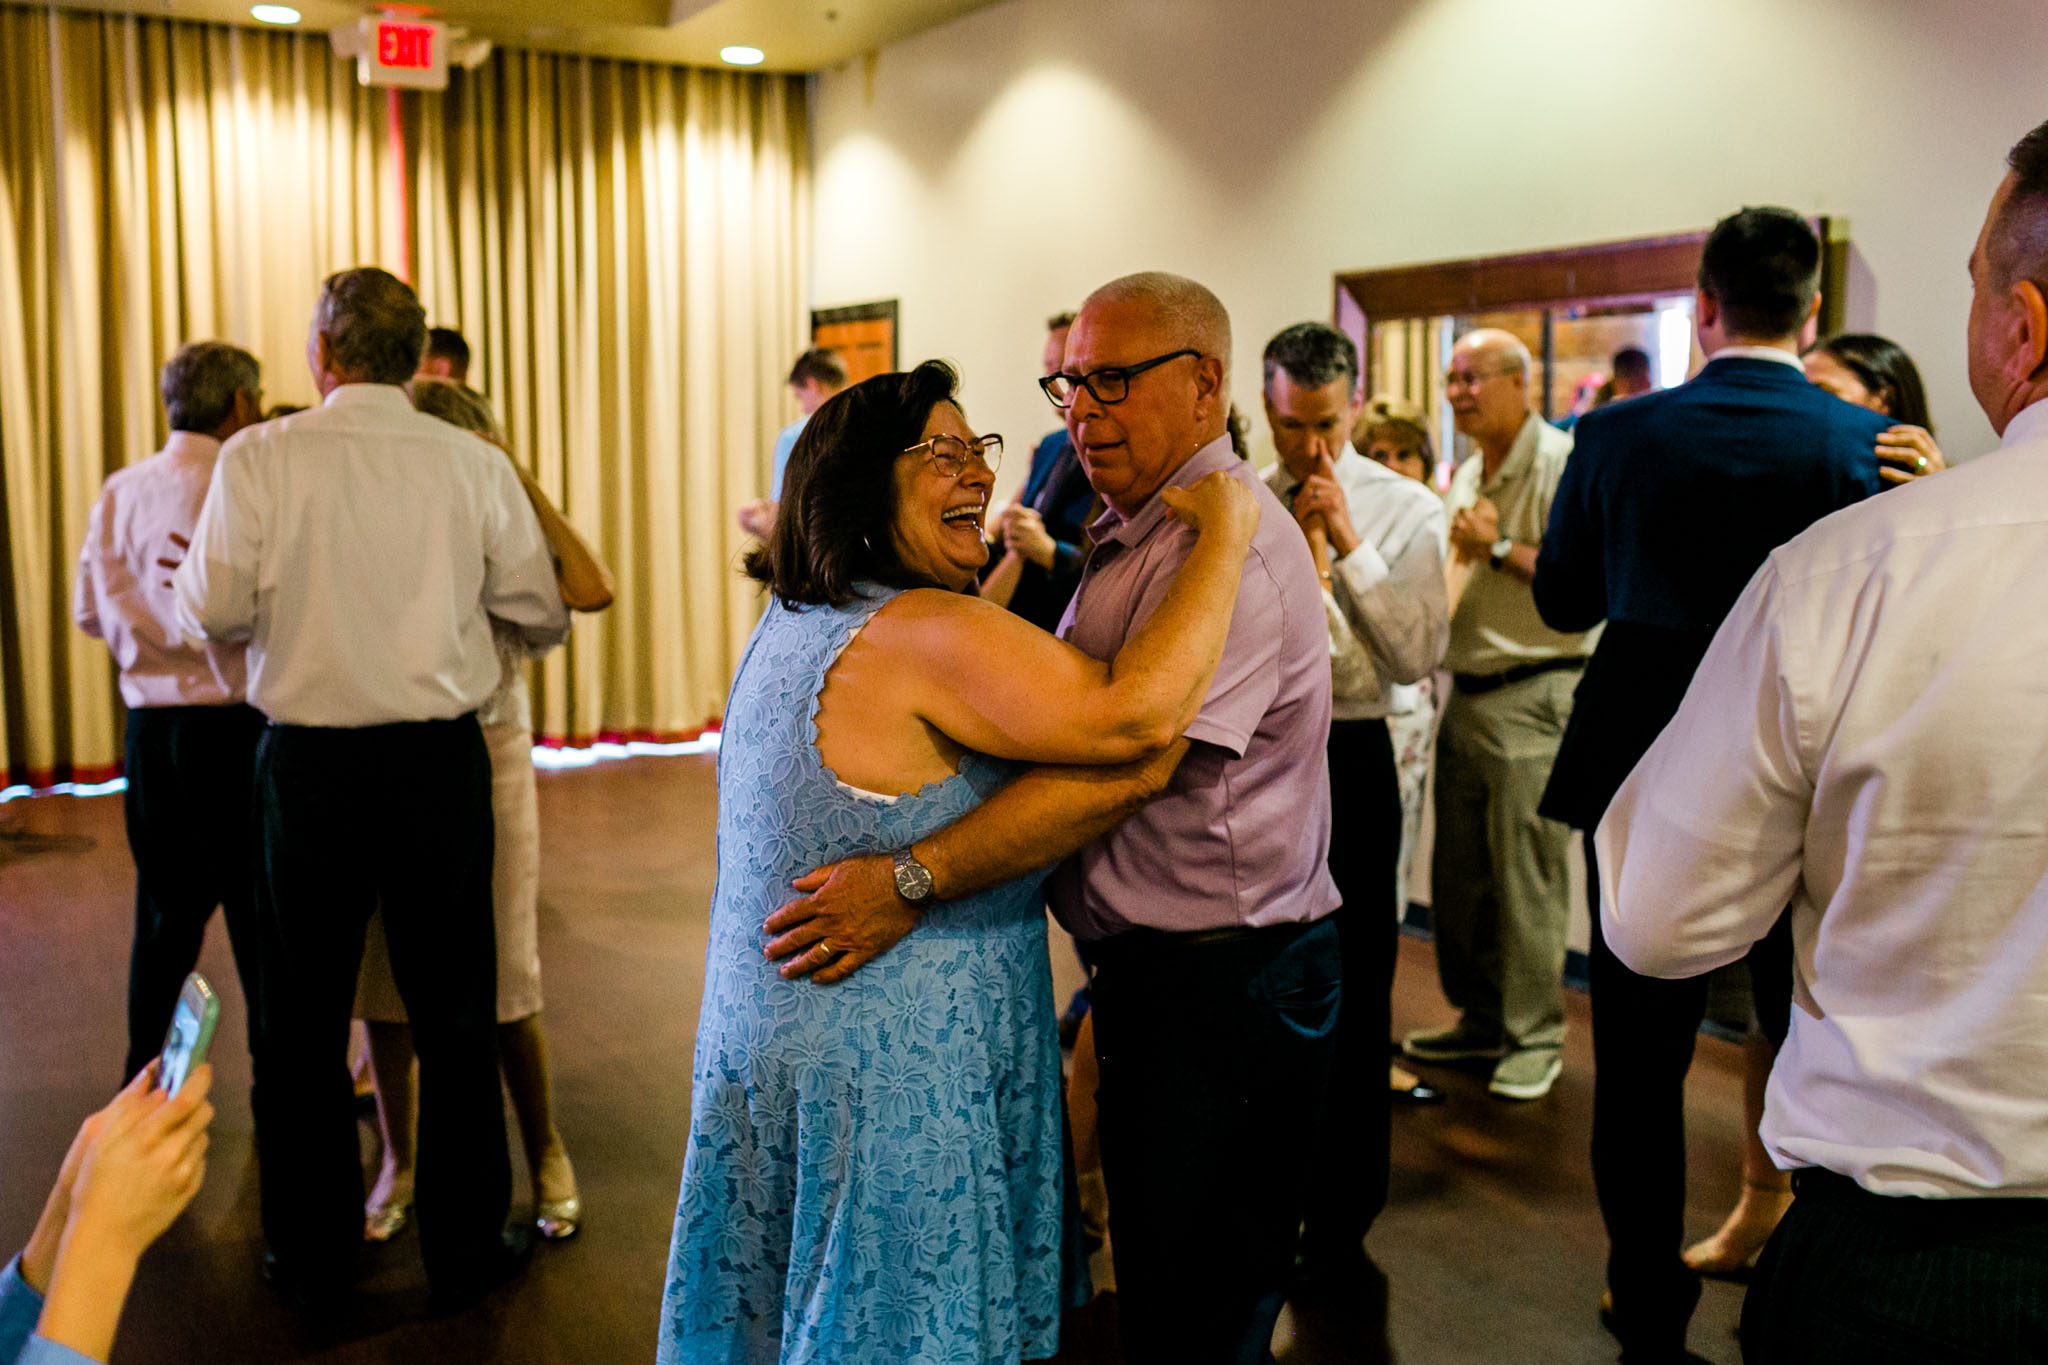 Man and woman dancing at reception | Royal Banquet Conference Center |People dancing at wedding reception at Royal Banquet Conference Center | Raleigh Wedding Photographer | By G. Lin Photography